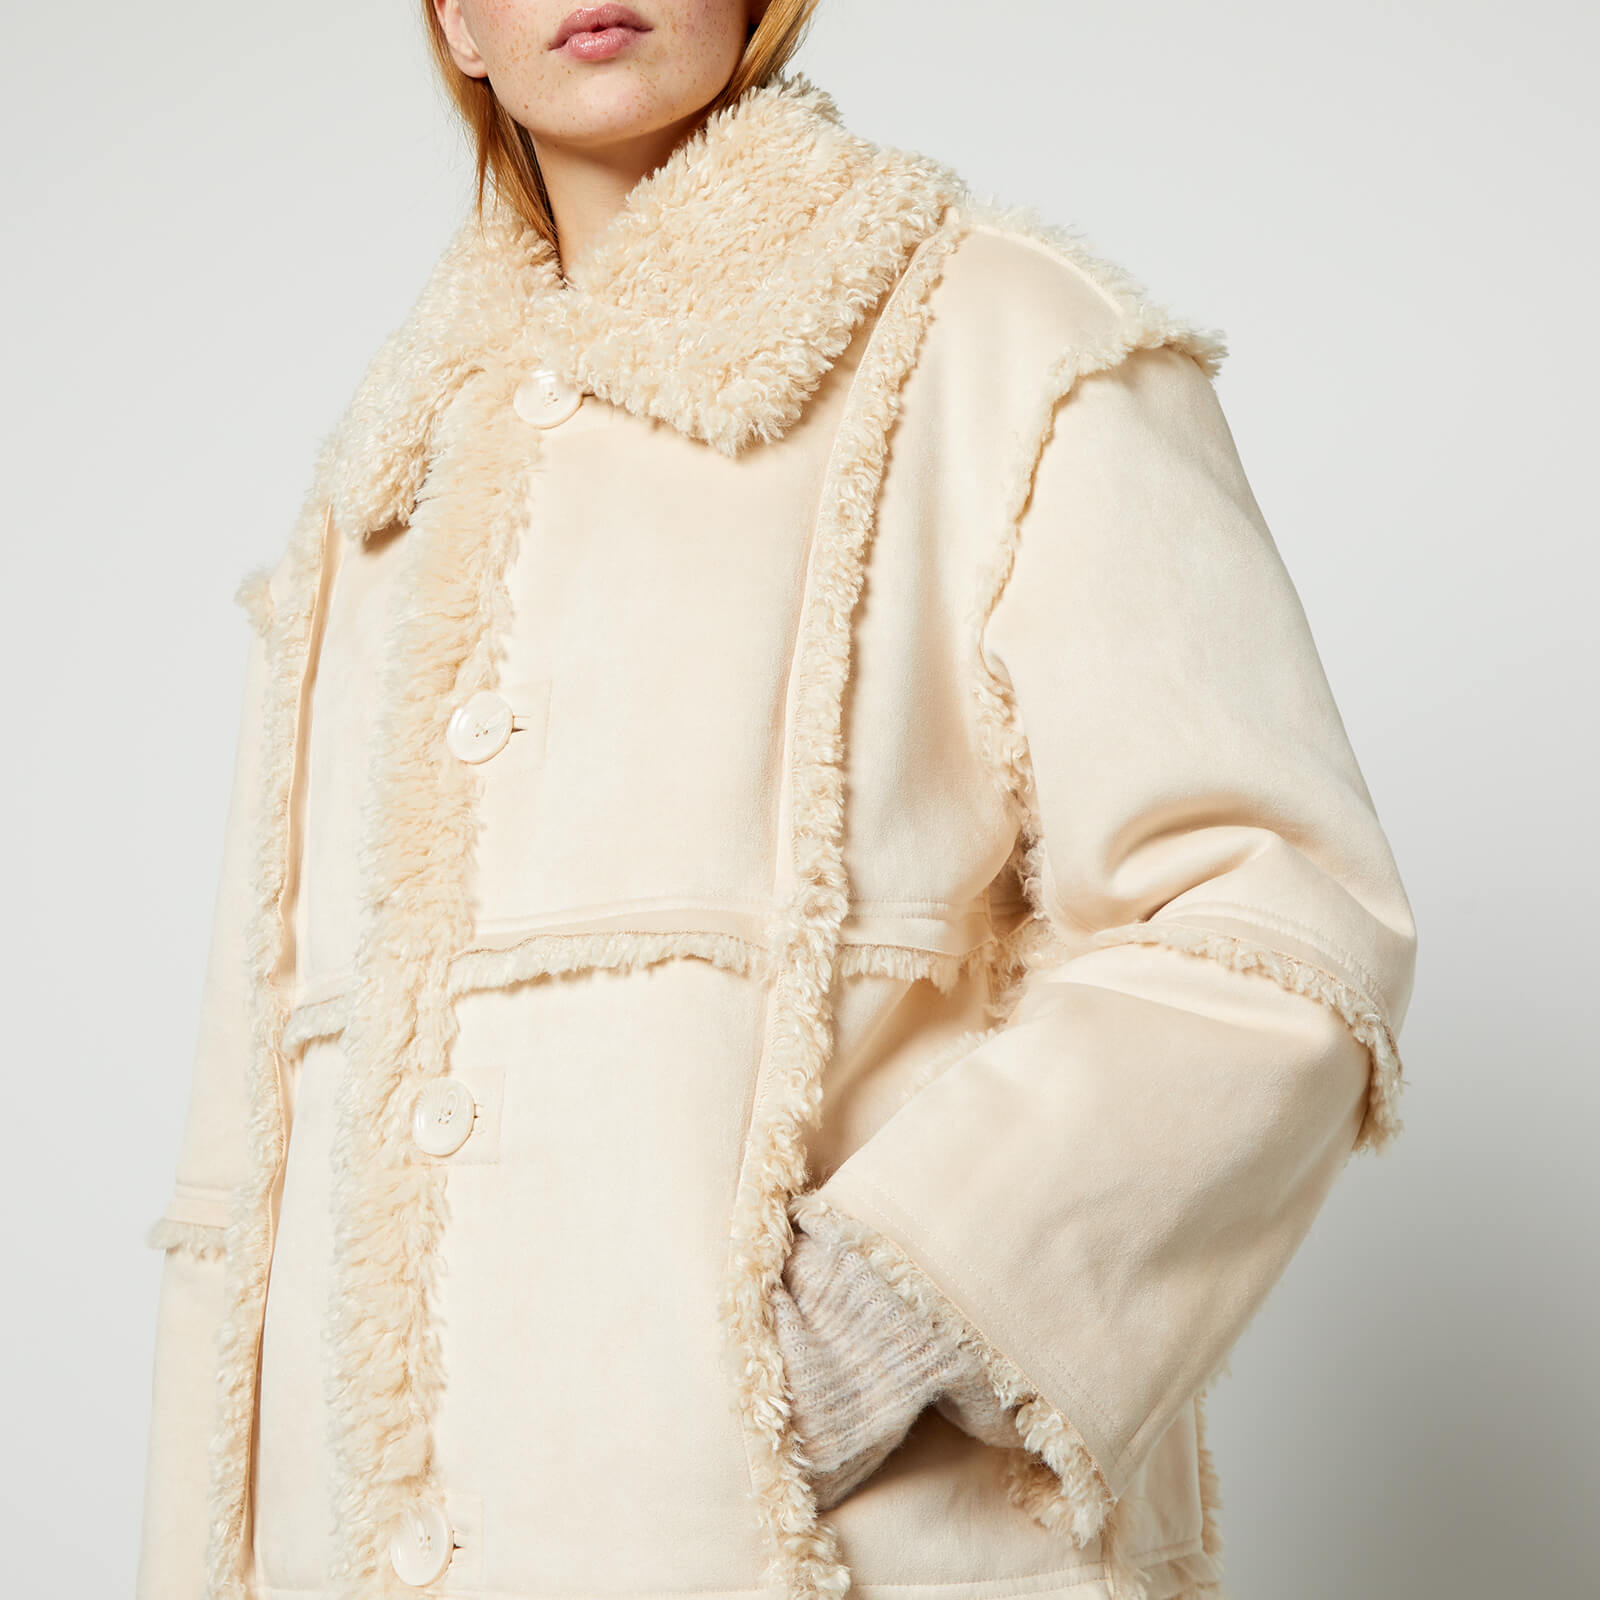 Stand Studio Samira Faux Suede And Sherpa Coat - Fr 34/uk 6 61732 9360 General Clothing, Beige